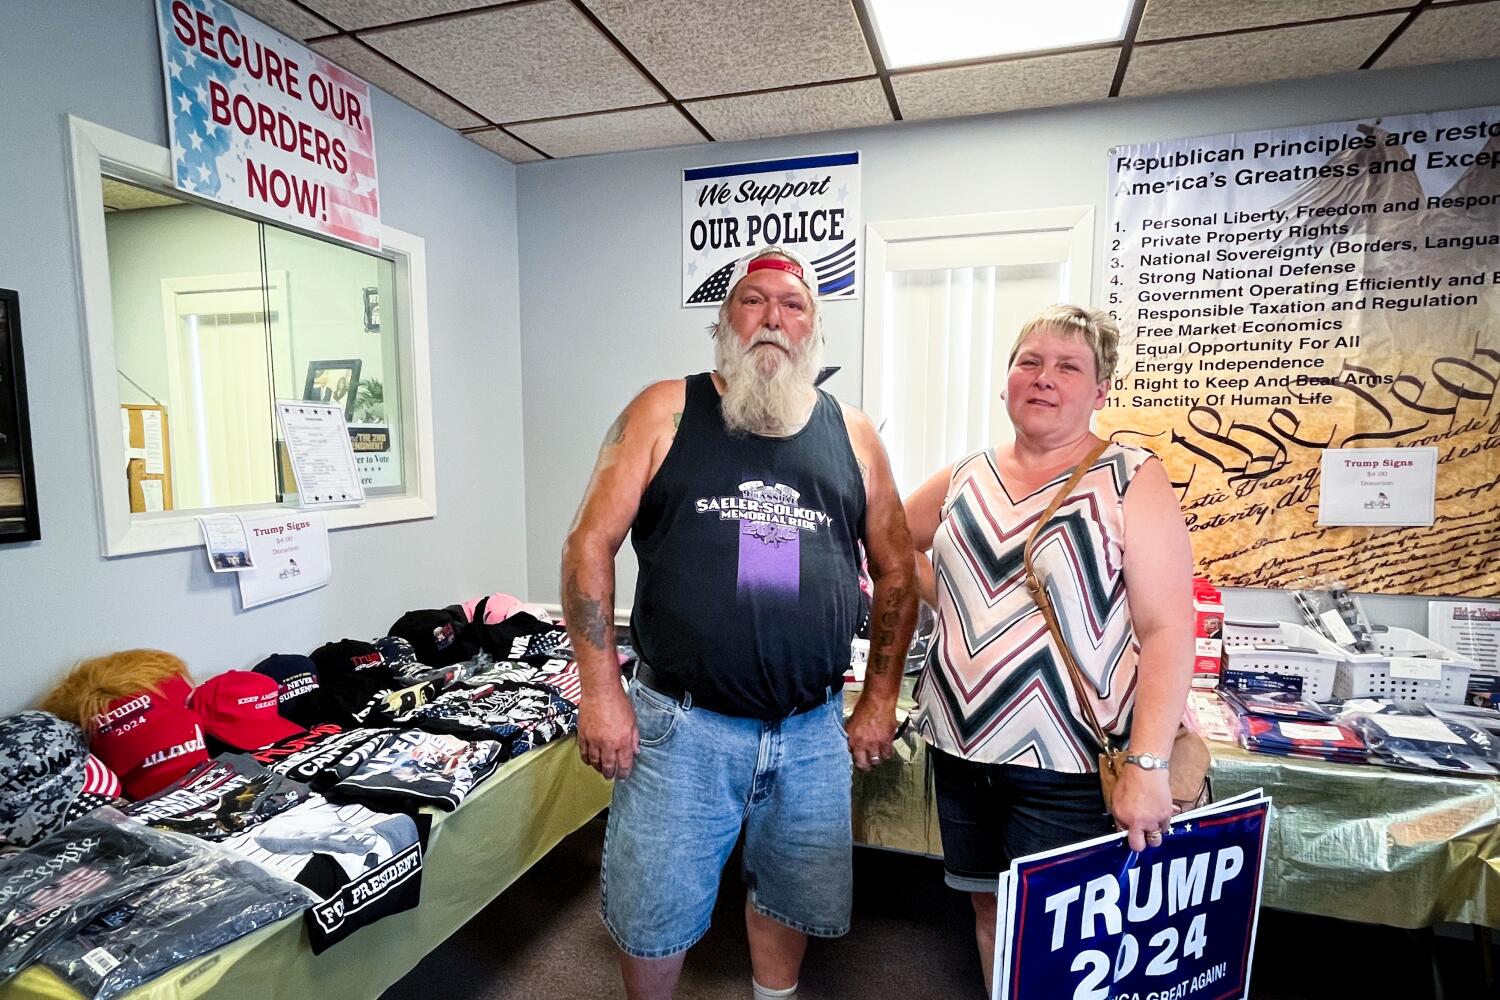 Trump was nearly killed in their small town. Now they grapple with politics, grief and anger